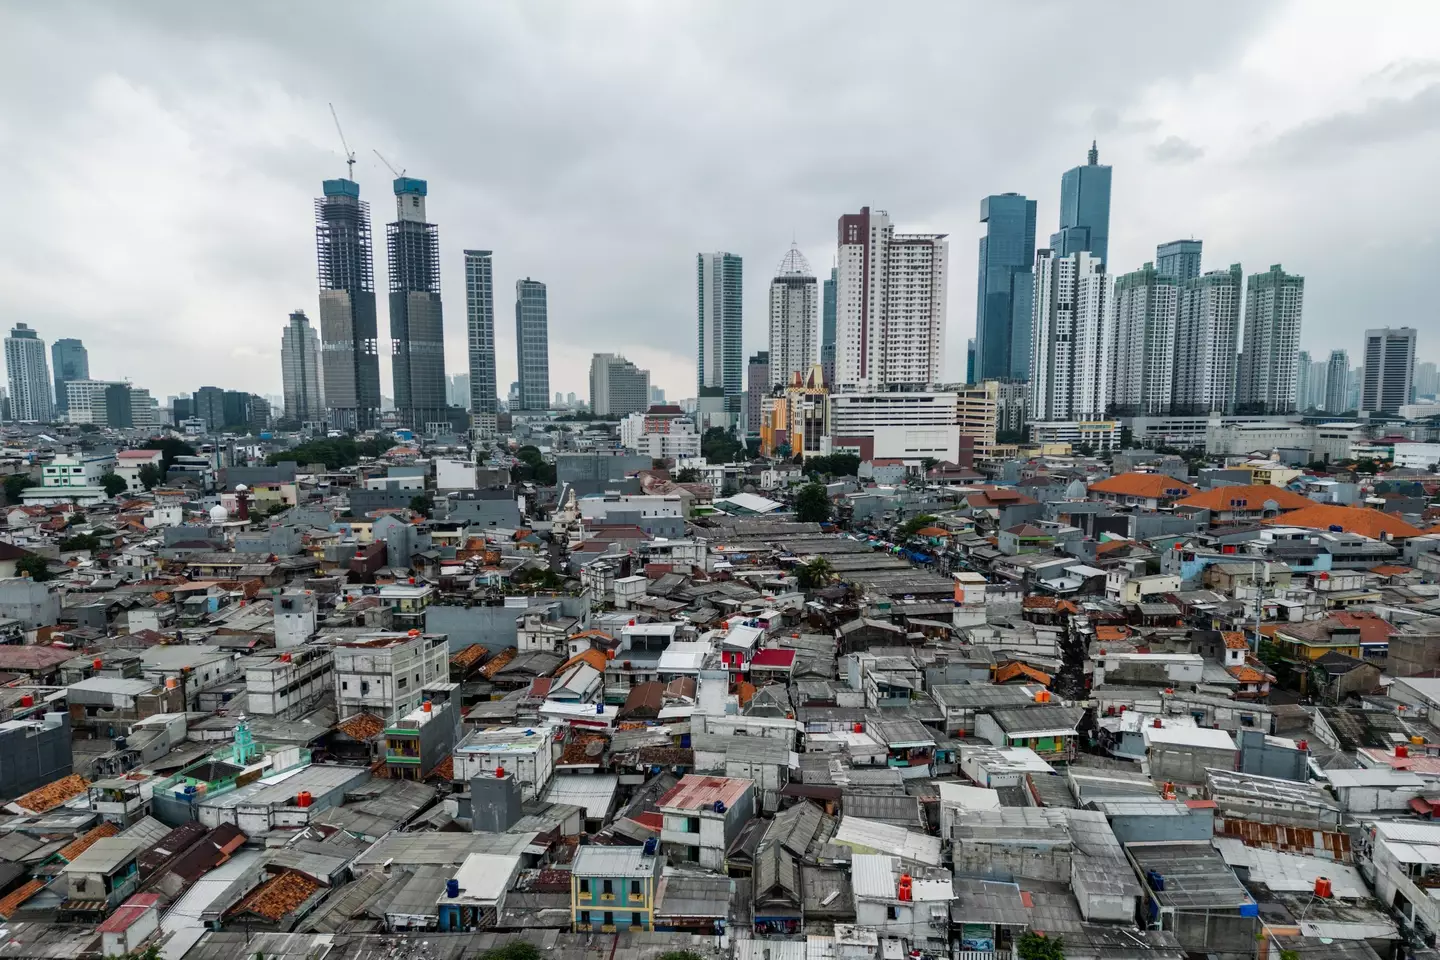 Jakarta is the world's fastest sinking city, and by 2050 a third of it could be submerged. (Garry Andrew Lotulung/Anadolu via Getty Images)